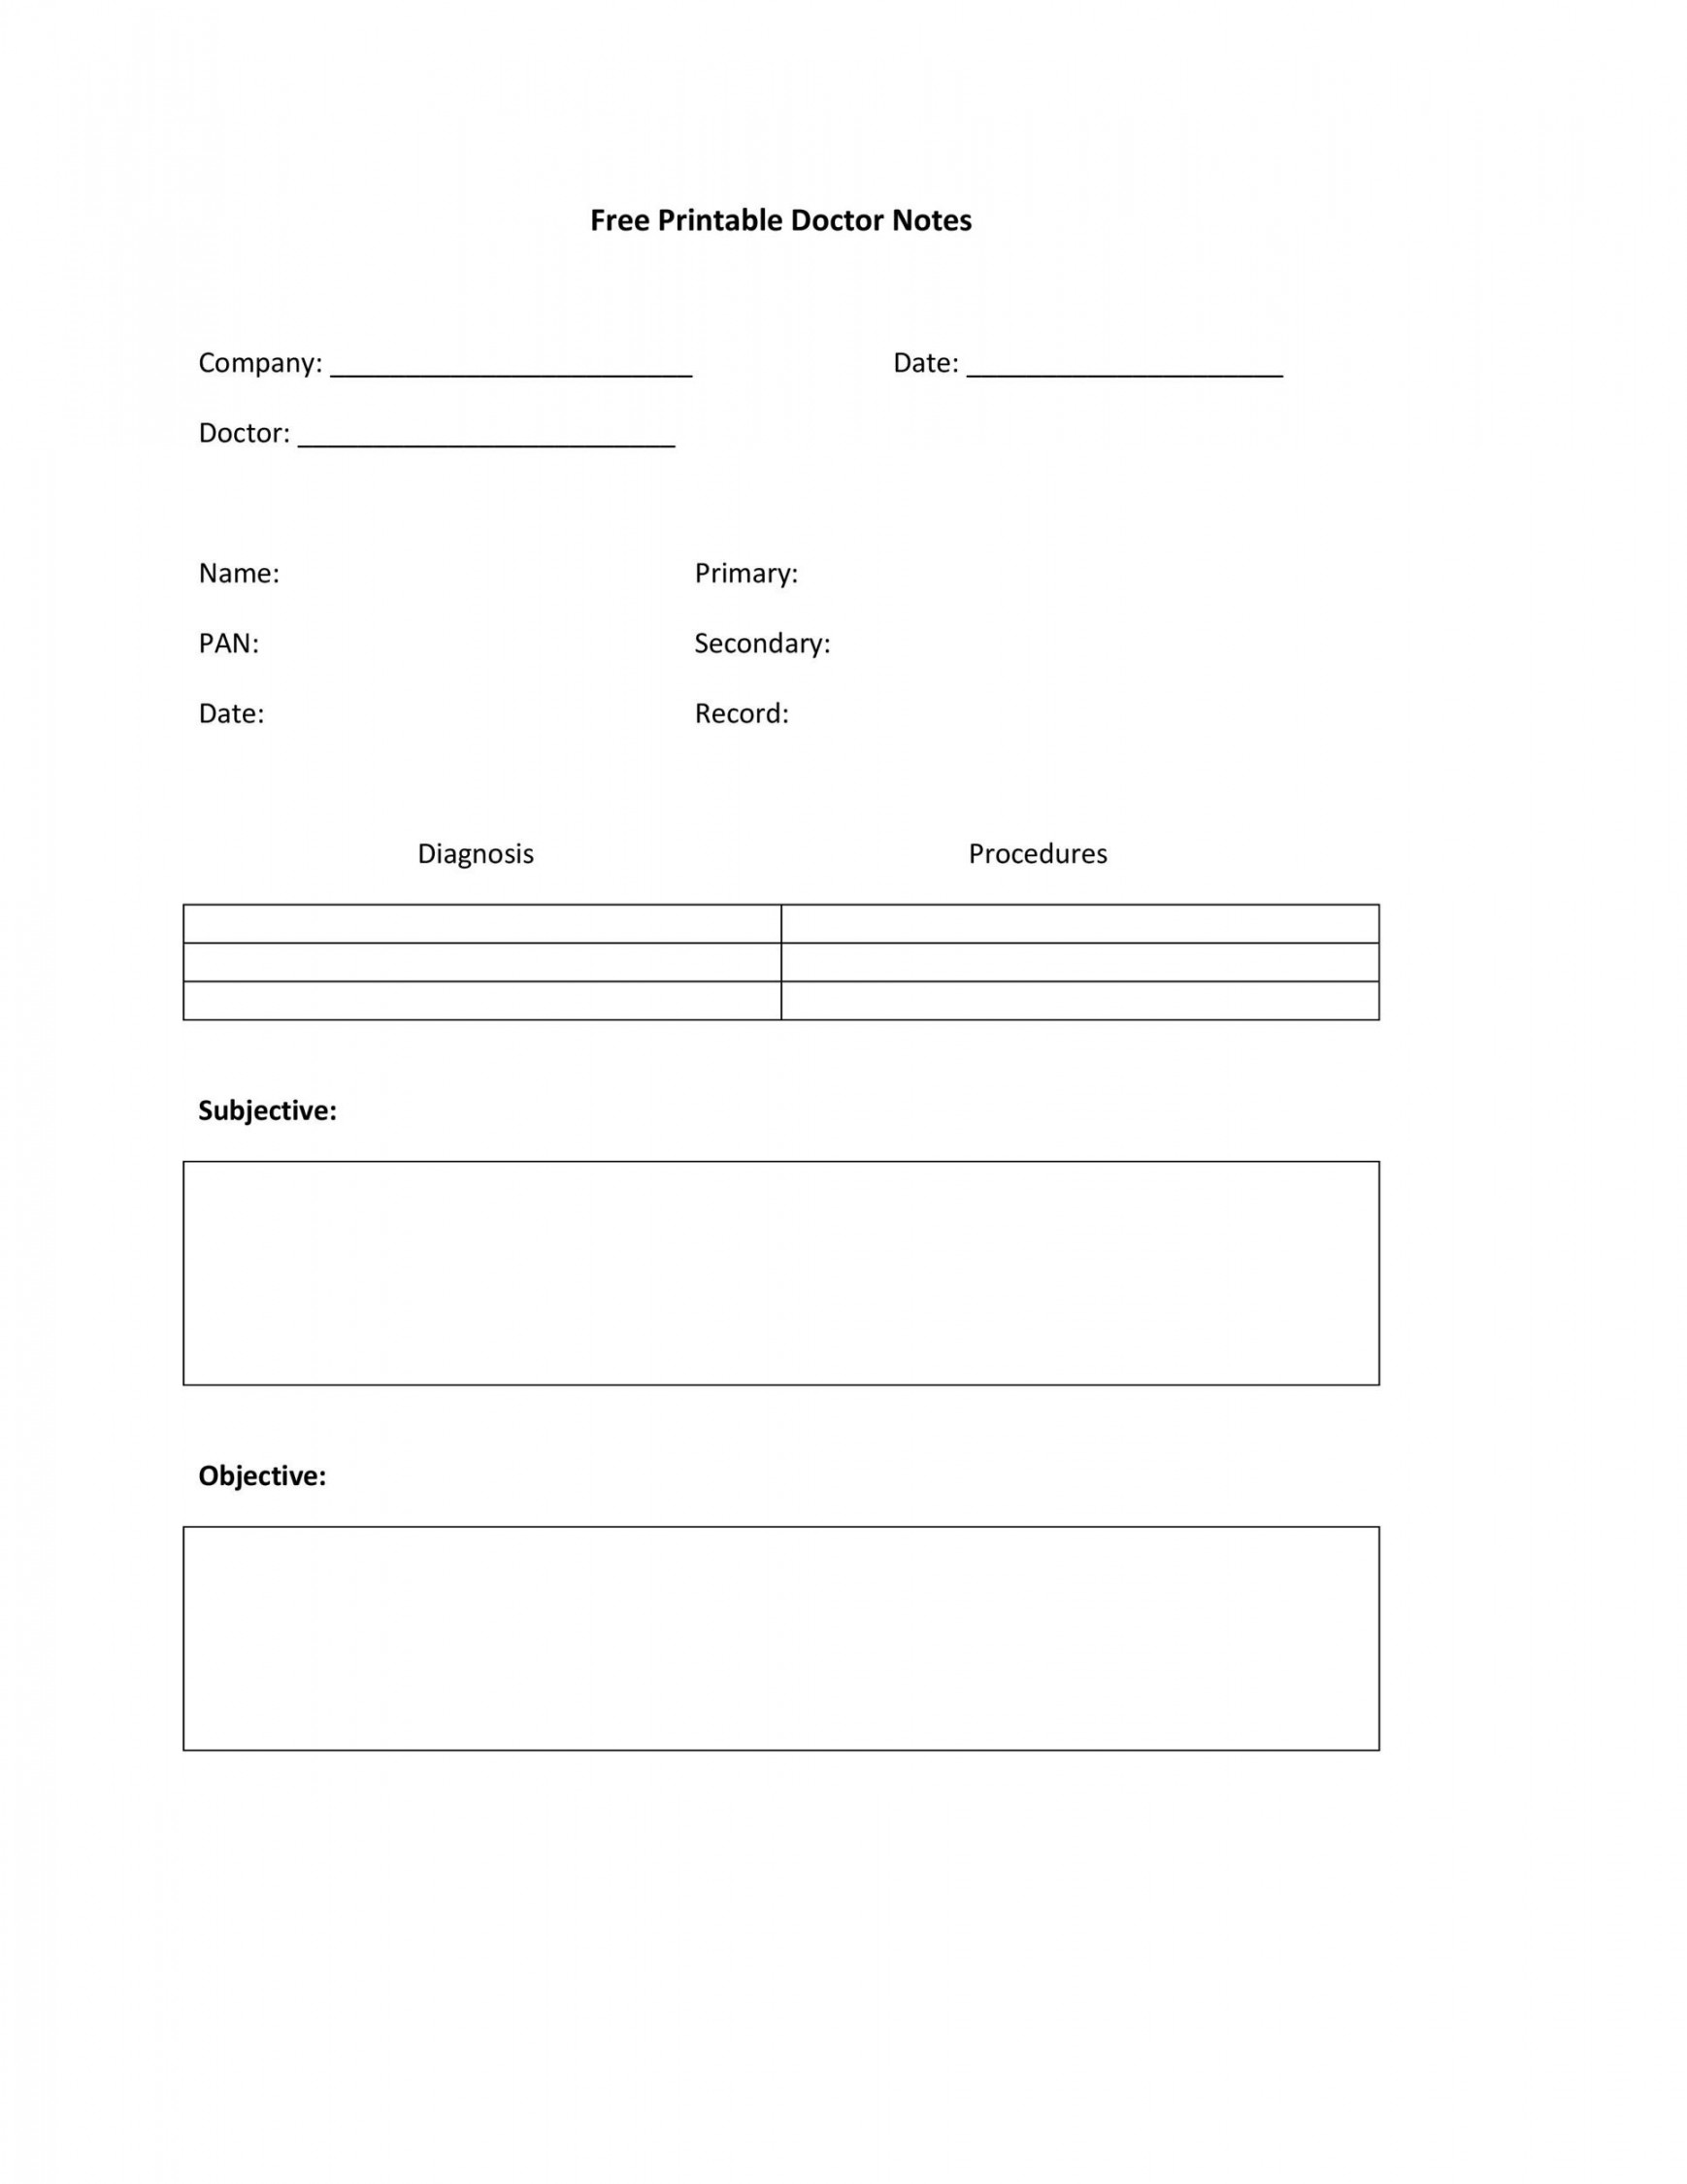 Free Doctor Note Templates [for Work or School]